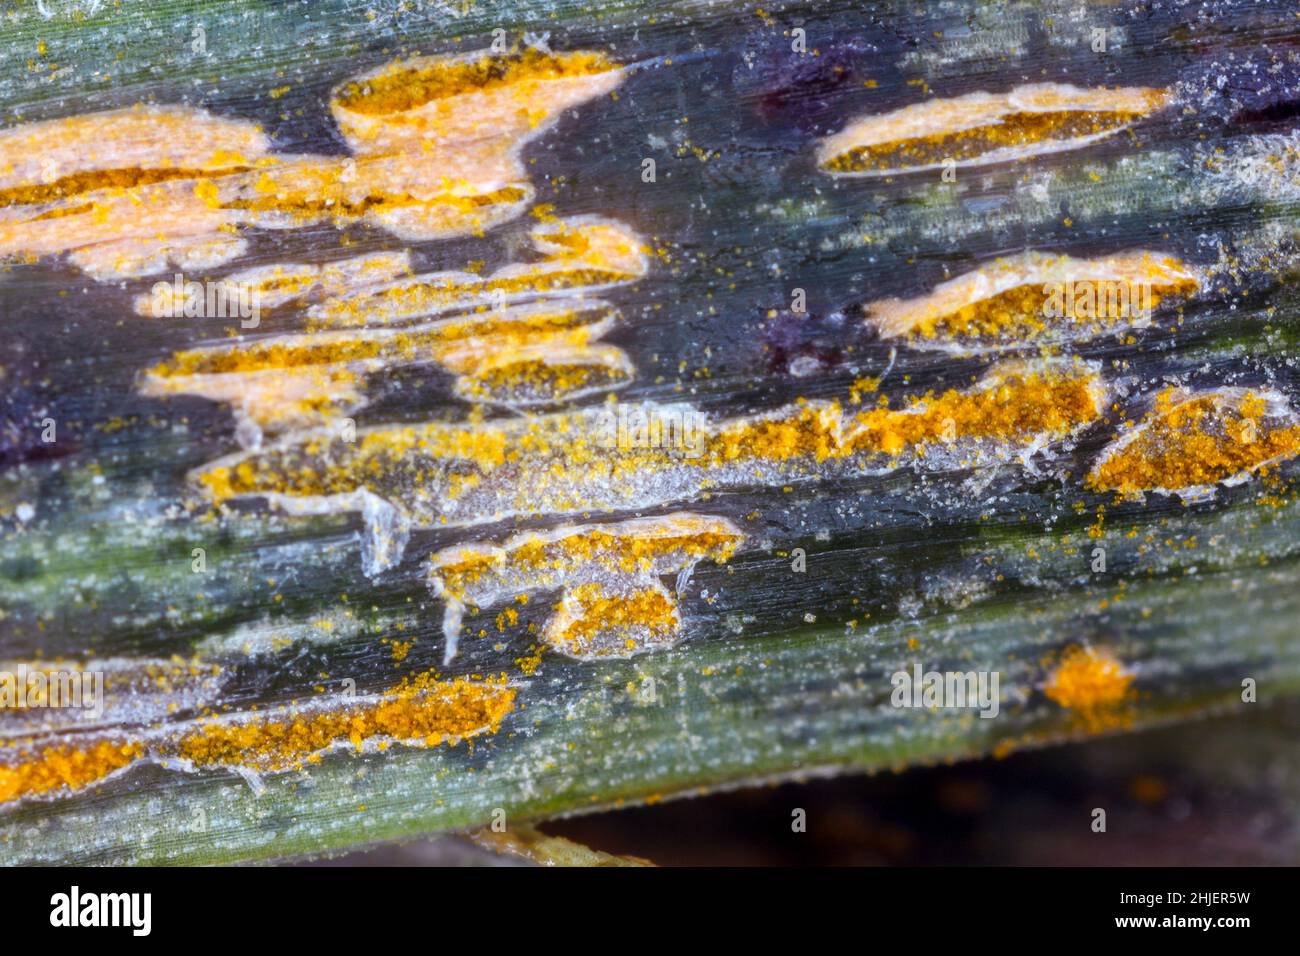 Symptoms of a plant pathogen and causal agent of oat and barley crown rust - Puccinia coronata on oat leaves - Telium, plural telia. Stock Photo